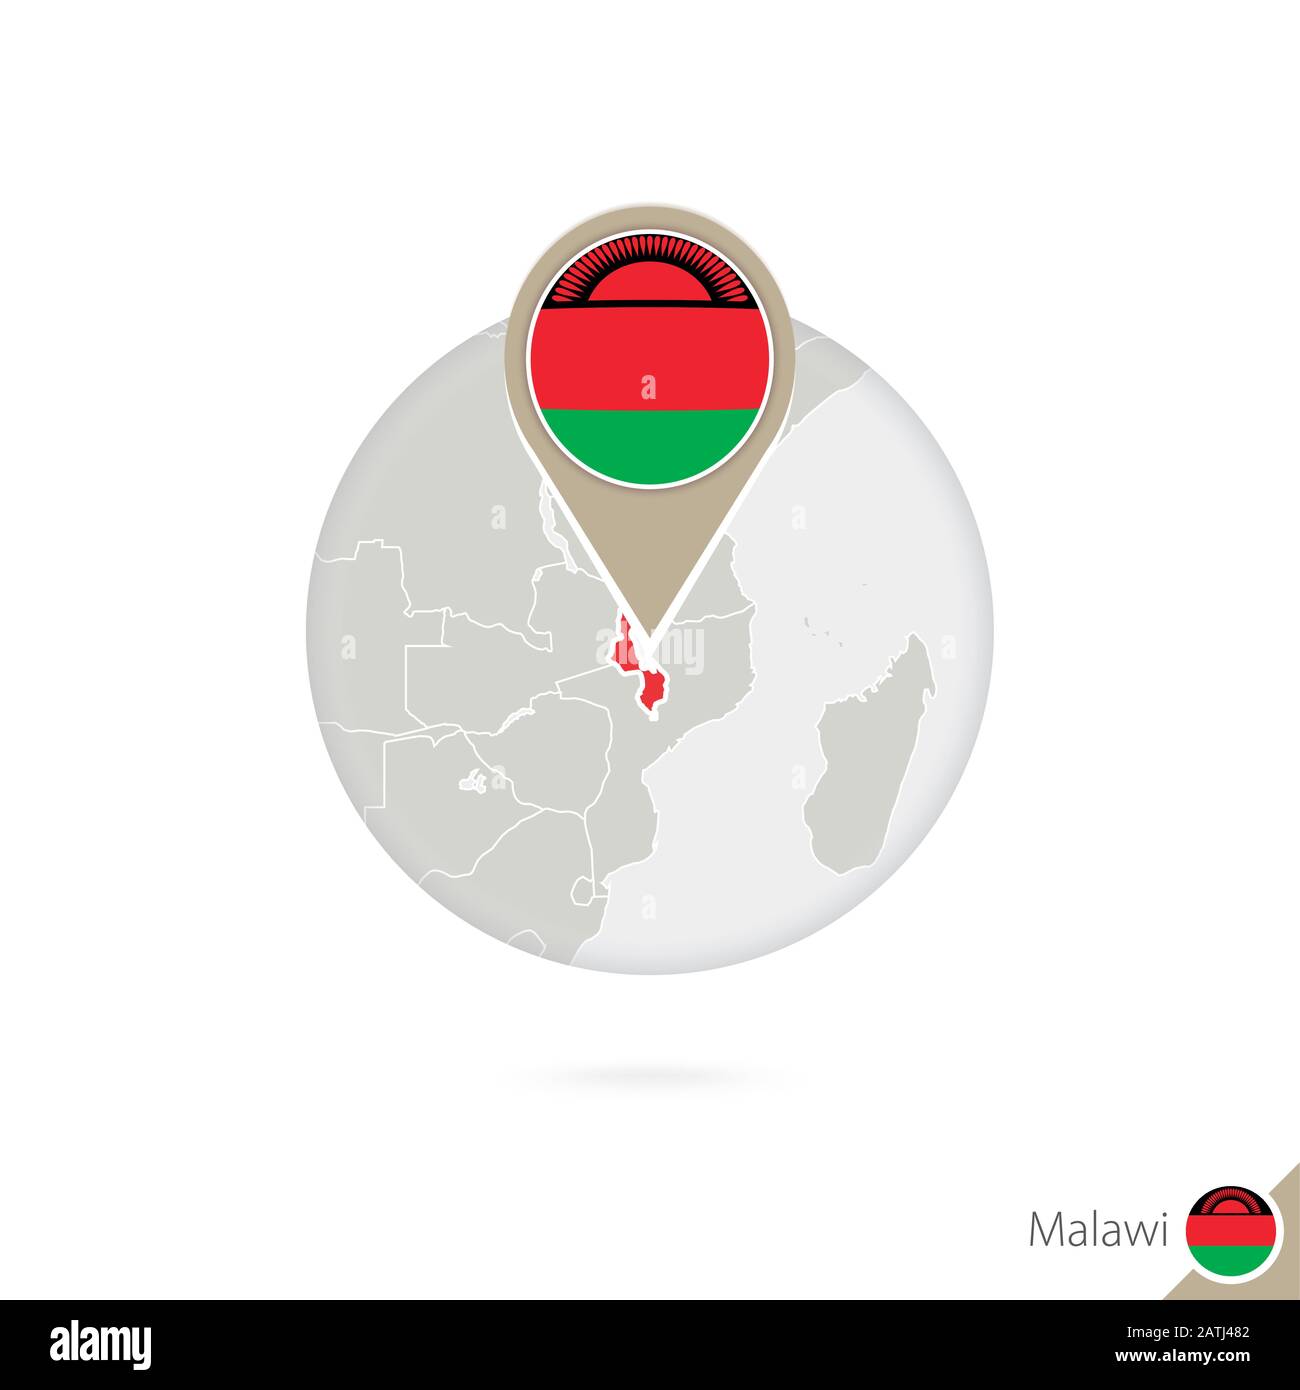 Malawi map and flag in circle. Map of Malawi, Malawi flag pin. Map of Malawi in the style of the globe. Vector Illustration. Stock Vector